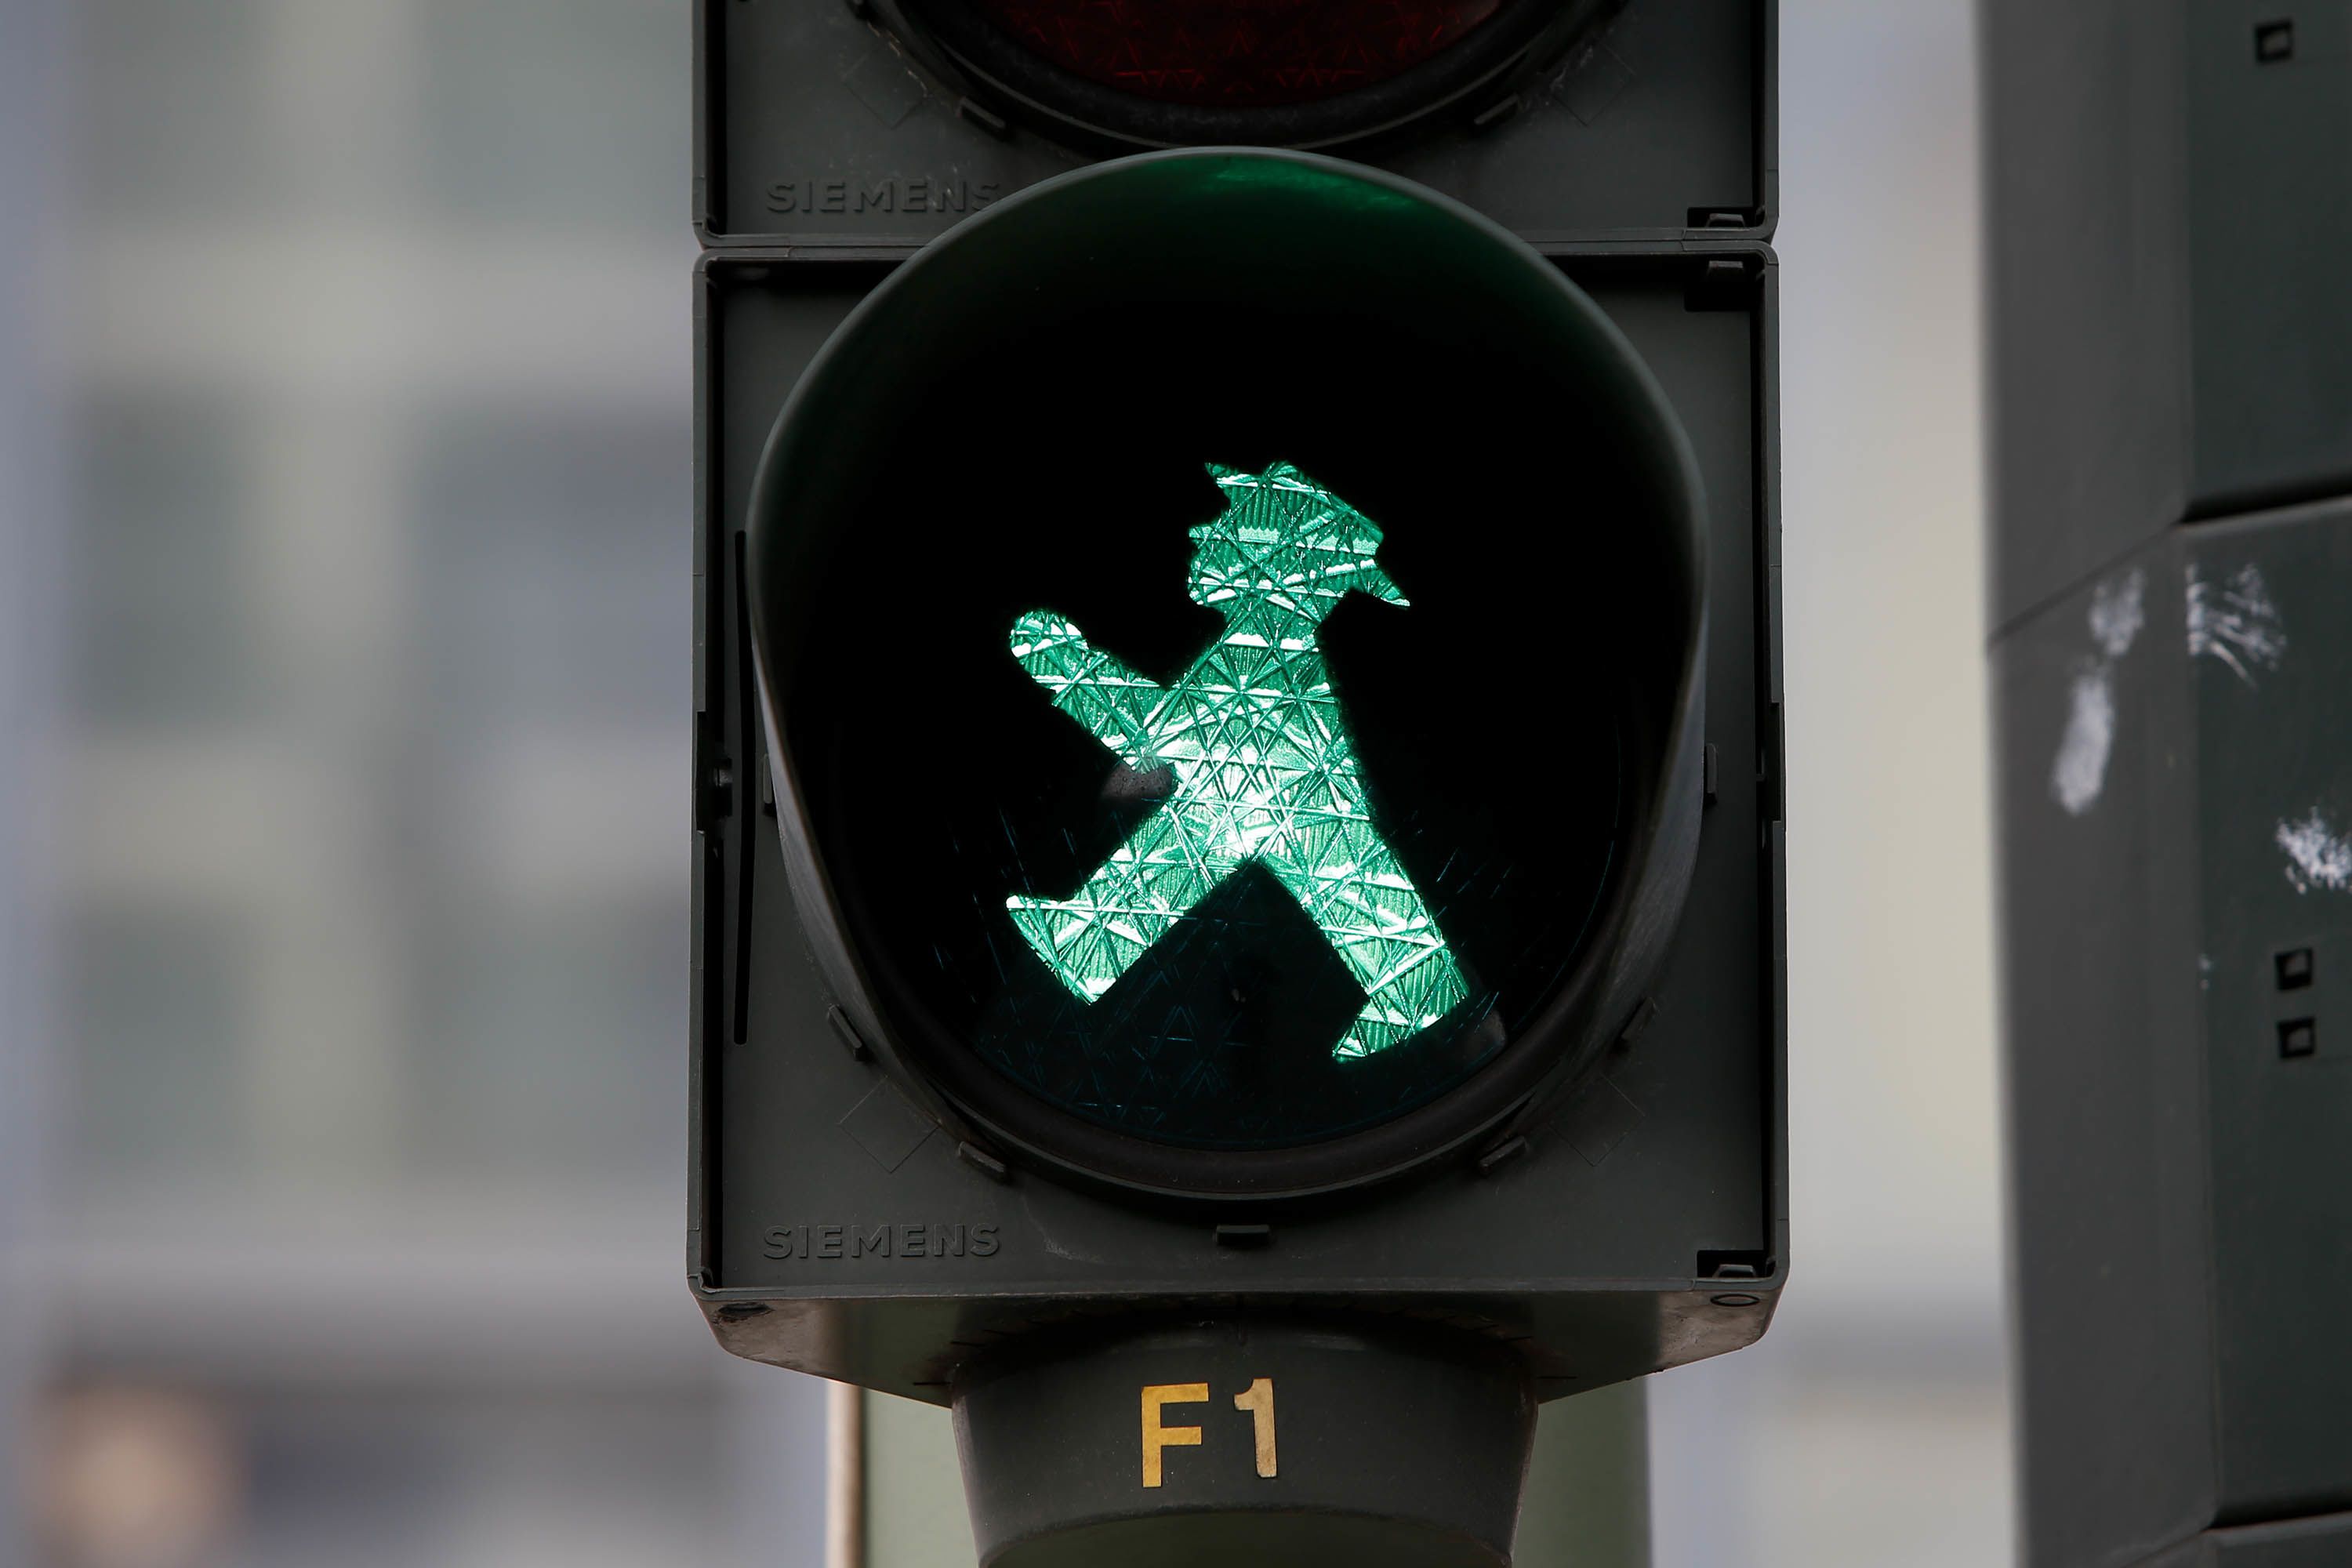 are much better why This | CNN traffic lights is in Germany